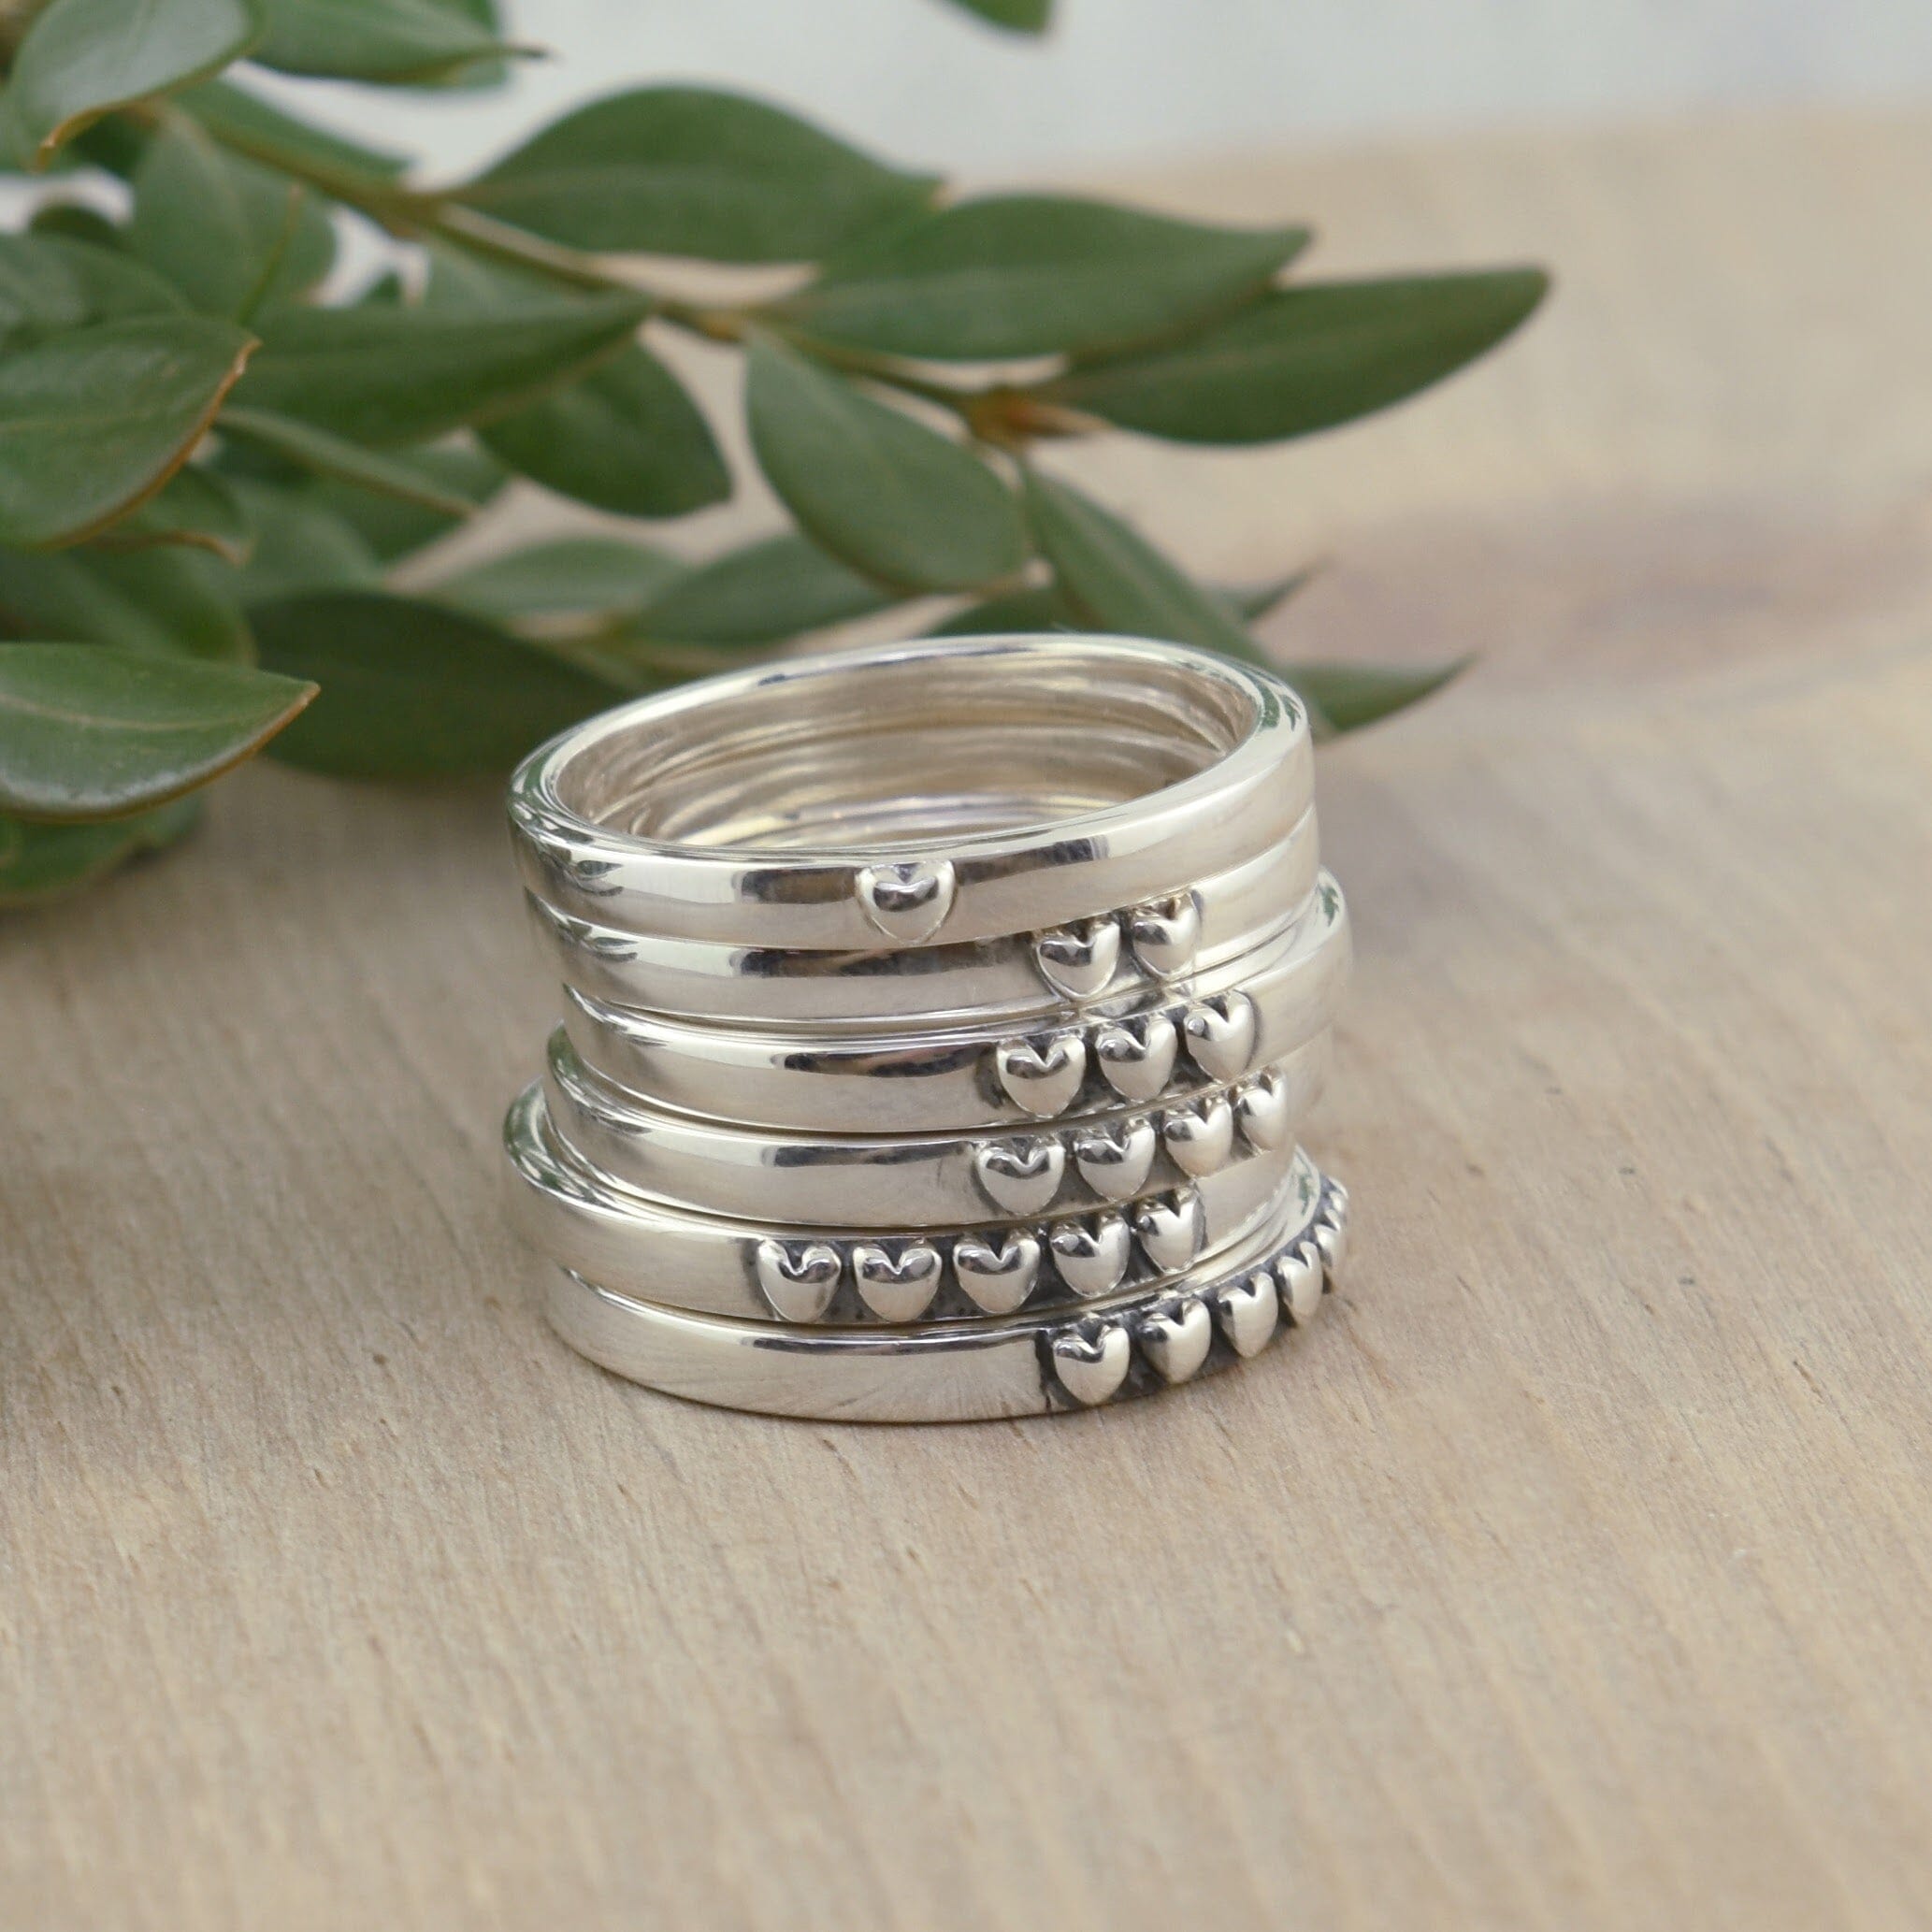 .925 sterling silver heart stack rings